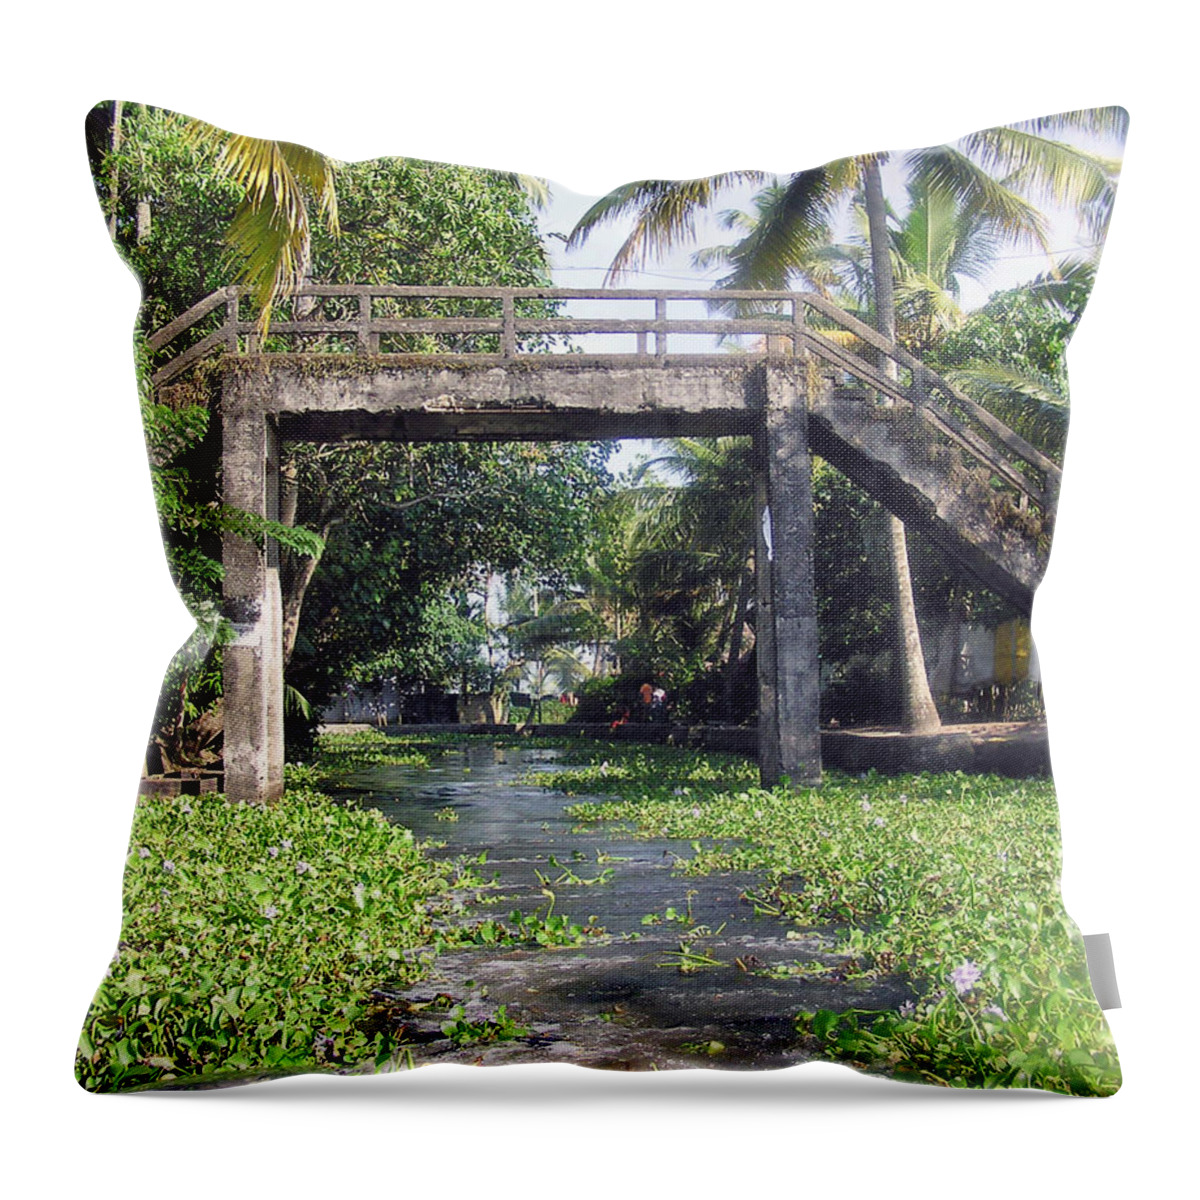 Alleppey Throw Pillow featuring the photograph An old stone bridge over a canal in Alleppey by Ashish Agarwal